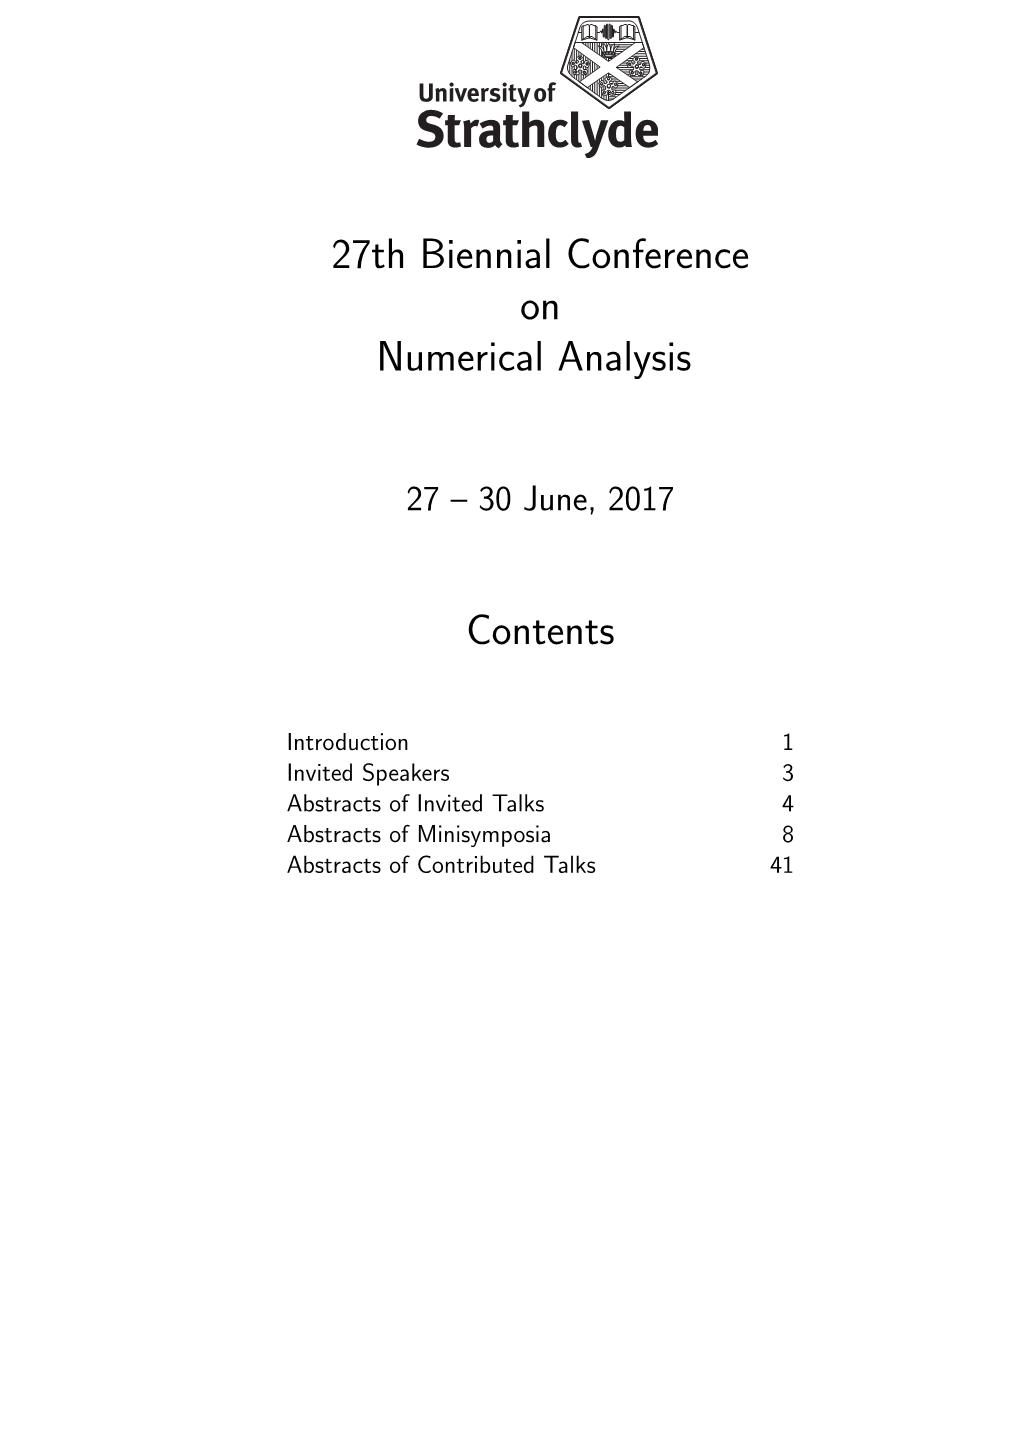 27Th Biennial Conference on Numerical Analysis Contents